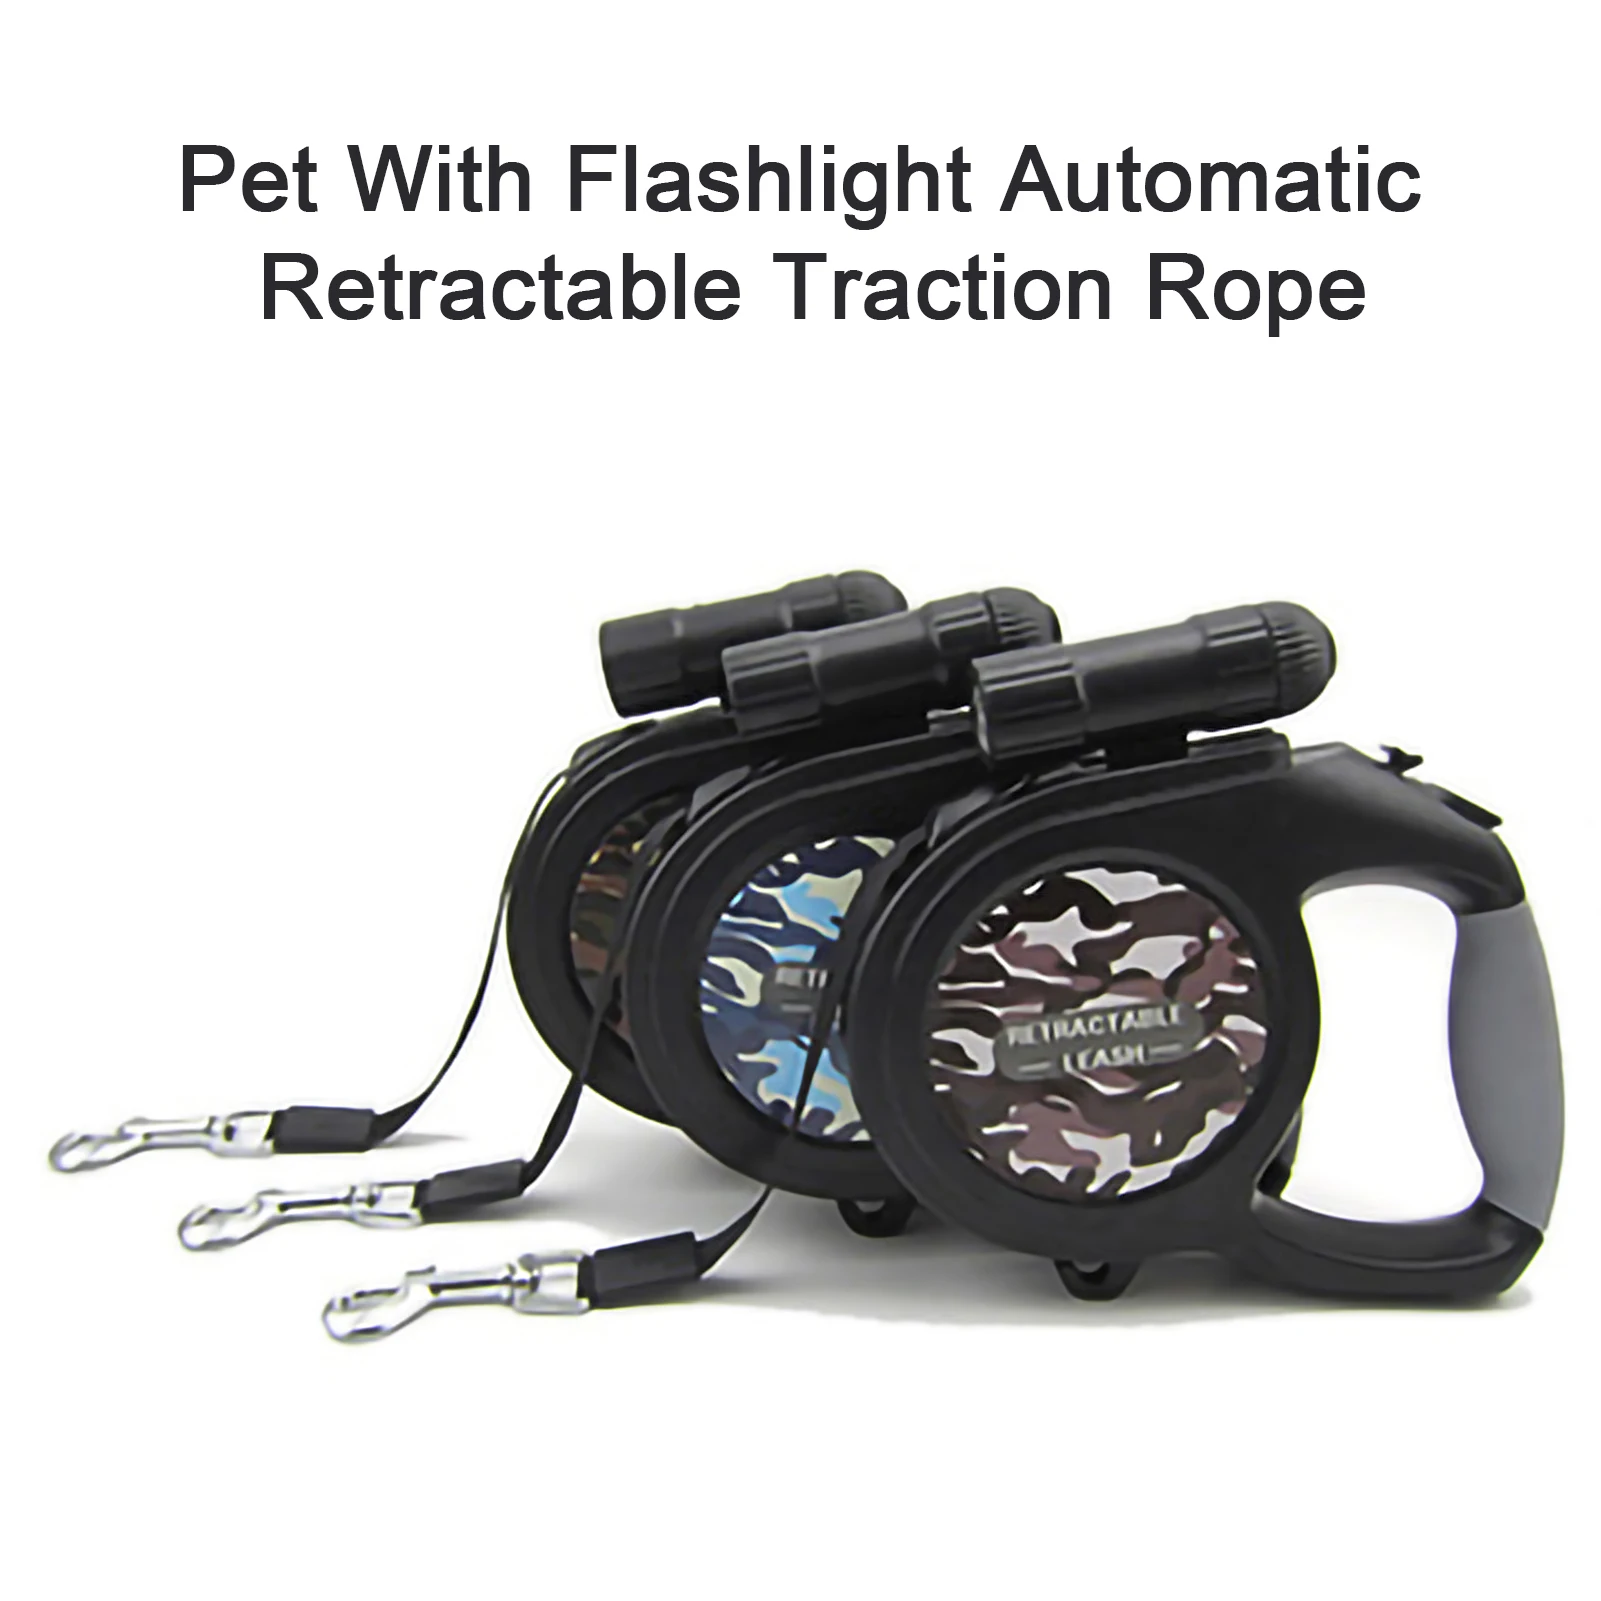 

Dog Leash Camouflage Automatic Retractable Pet Leash with Detachable Flashlight Non-Slip Handle for Small Medium and Large Dogs